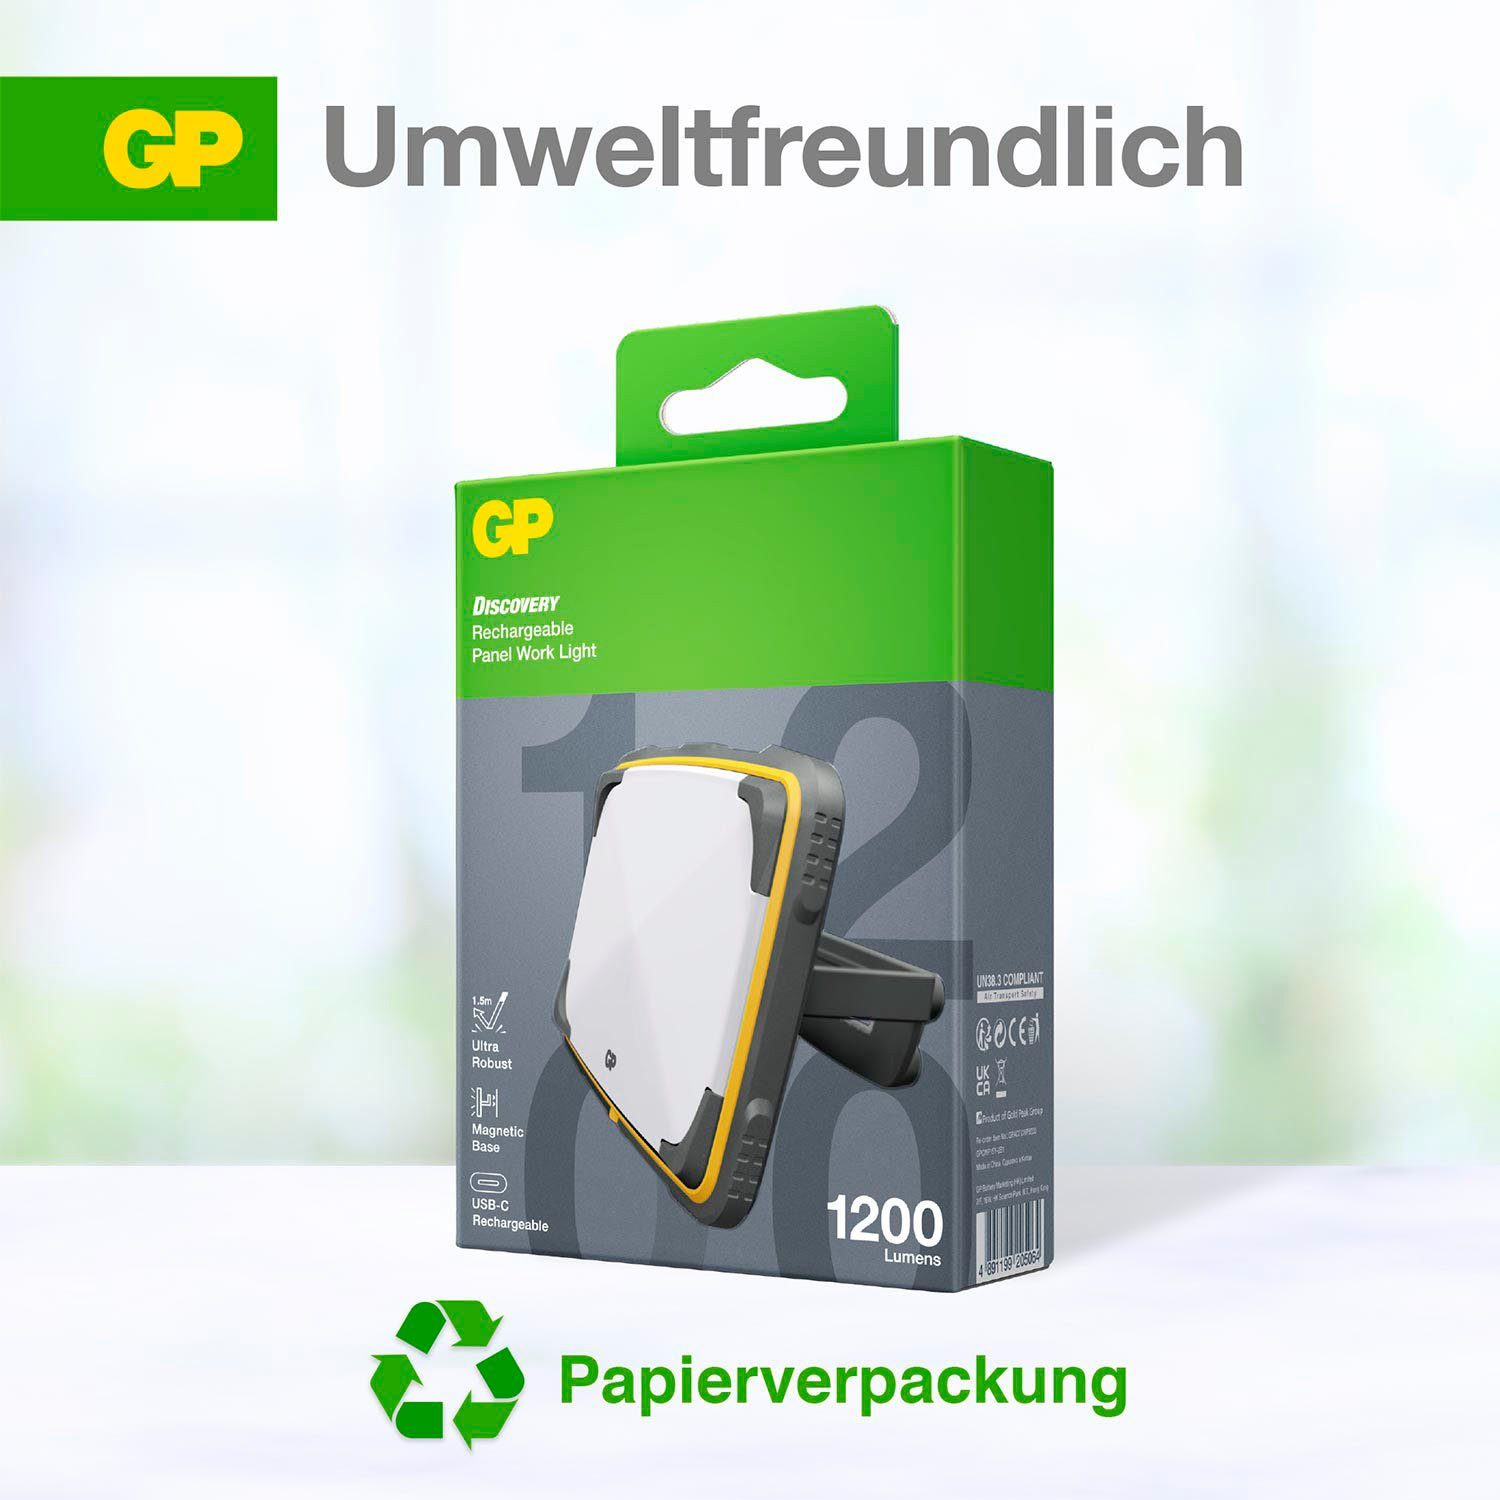 CWP15 Taschenlampe Batteries Discovery Arbeitslampe GP